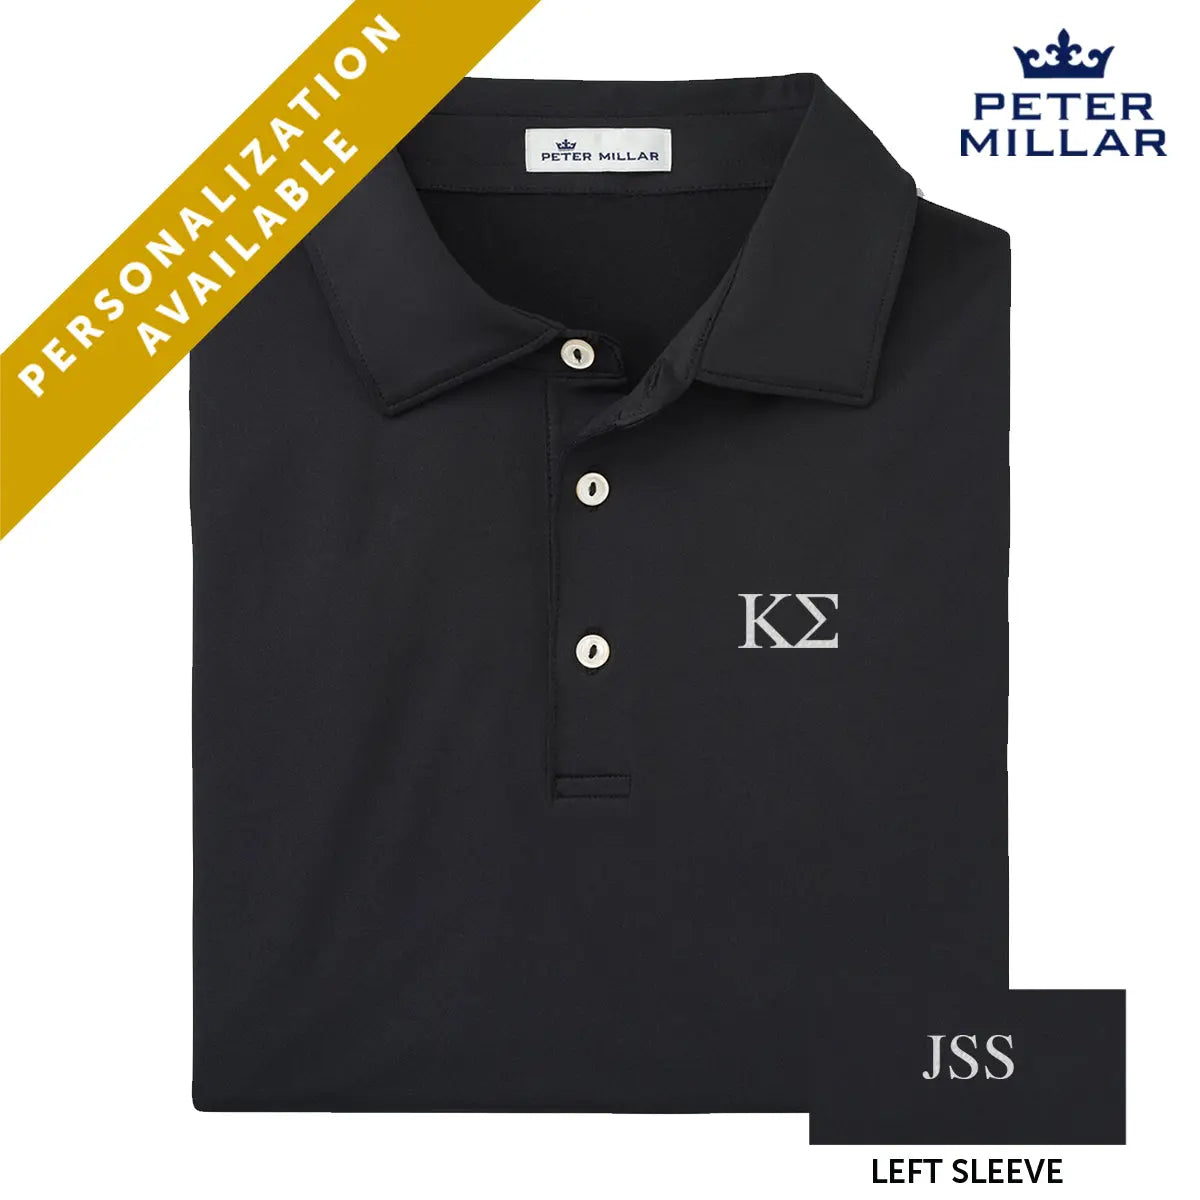 New! Kappa Sig Personalized Peter Millar Black Polo With Greek Letters Kappa Sigma